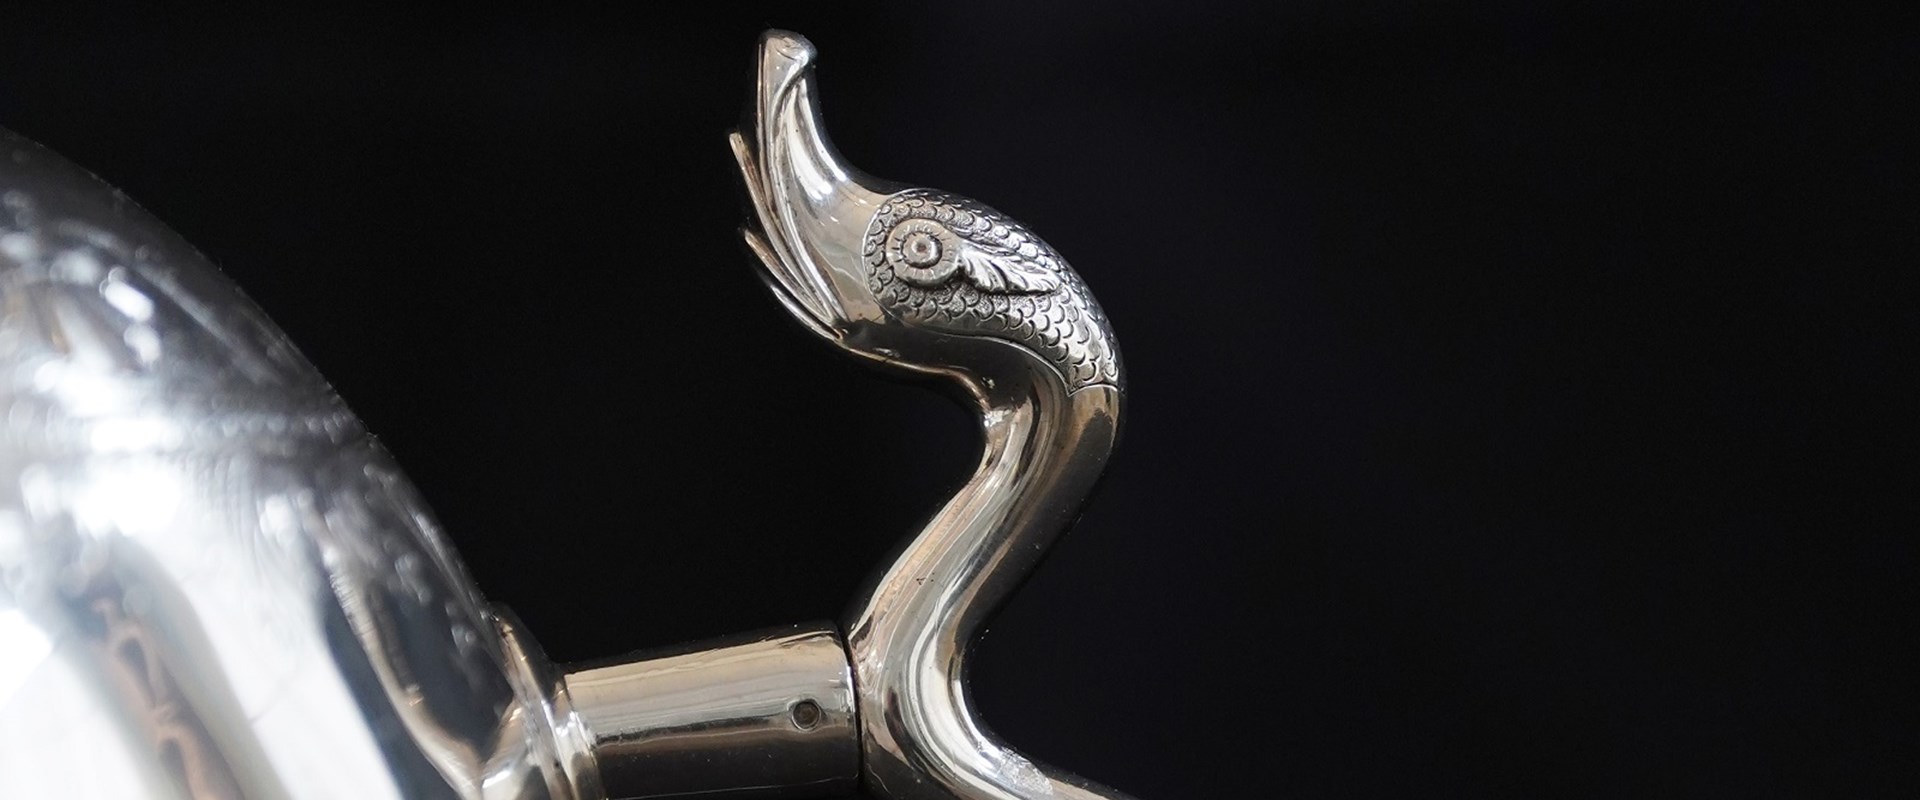 Closeup of the handle of one of the ovoid urns and a small portion of the urn's body. The handle is extremely thin and wavy, its top end shaped to resemble a serpent's head.